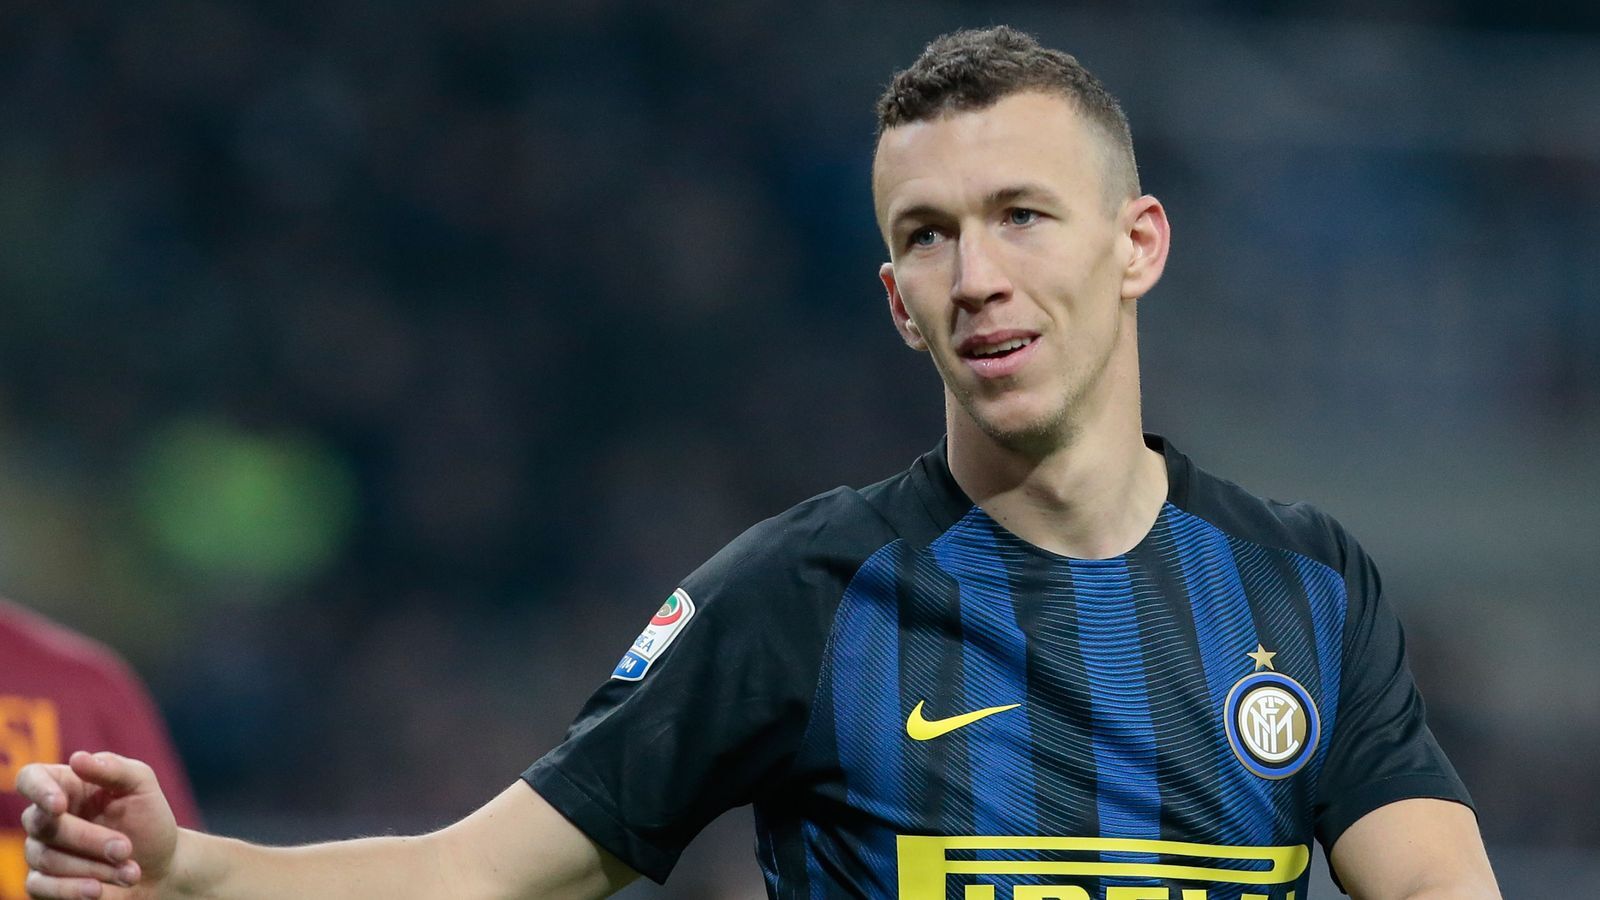 Perišić is likely to return to Inter because of Bavaria Munich loan